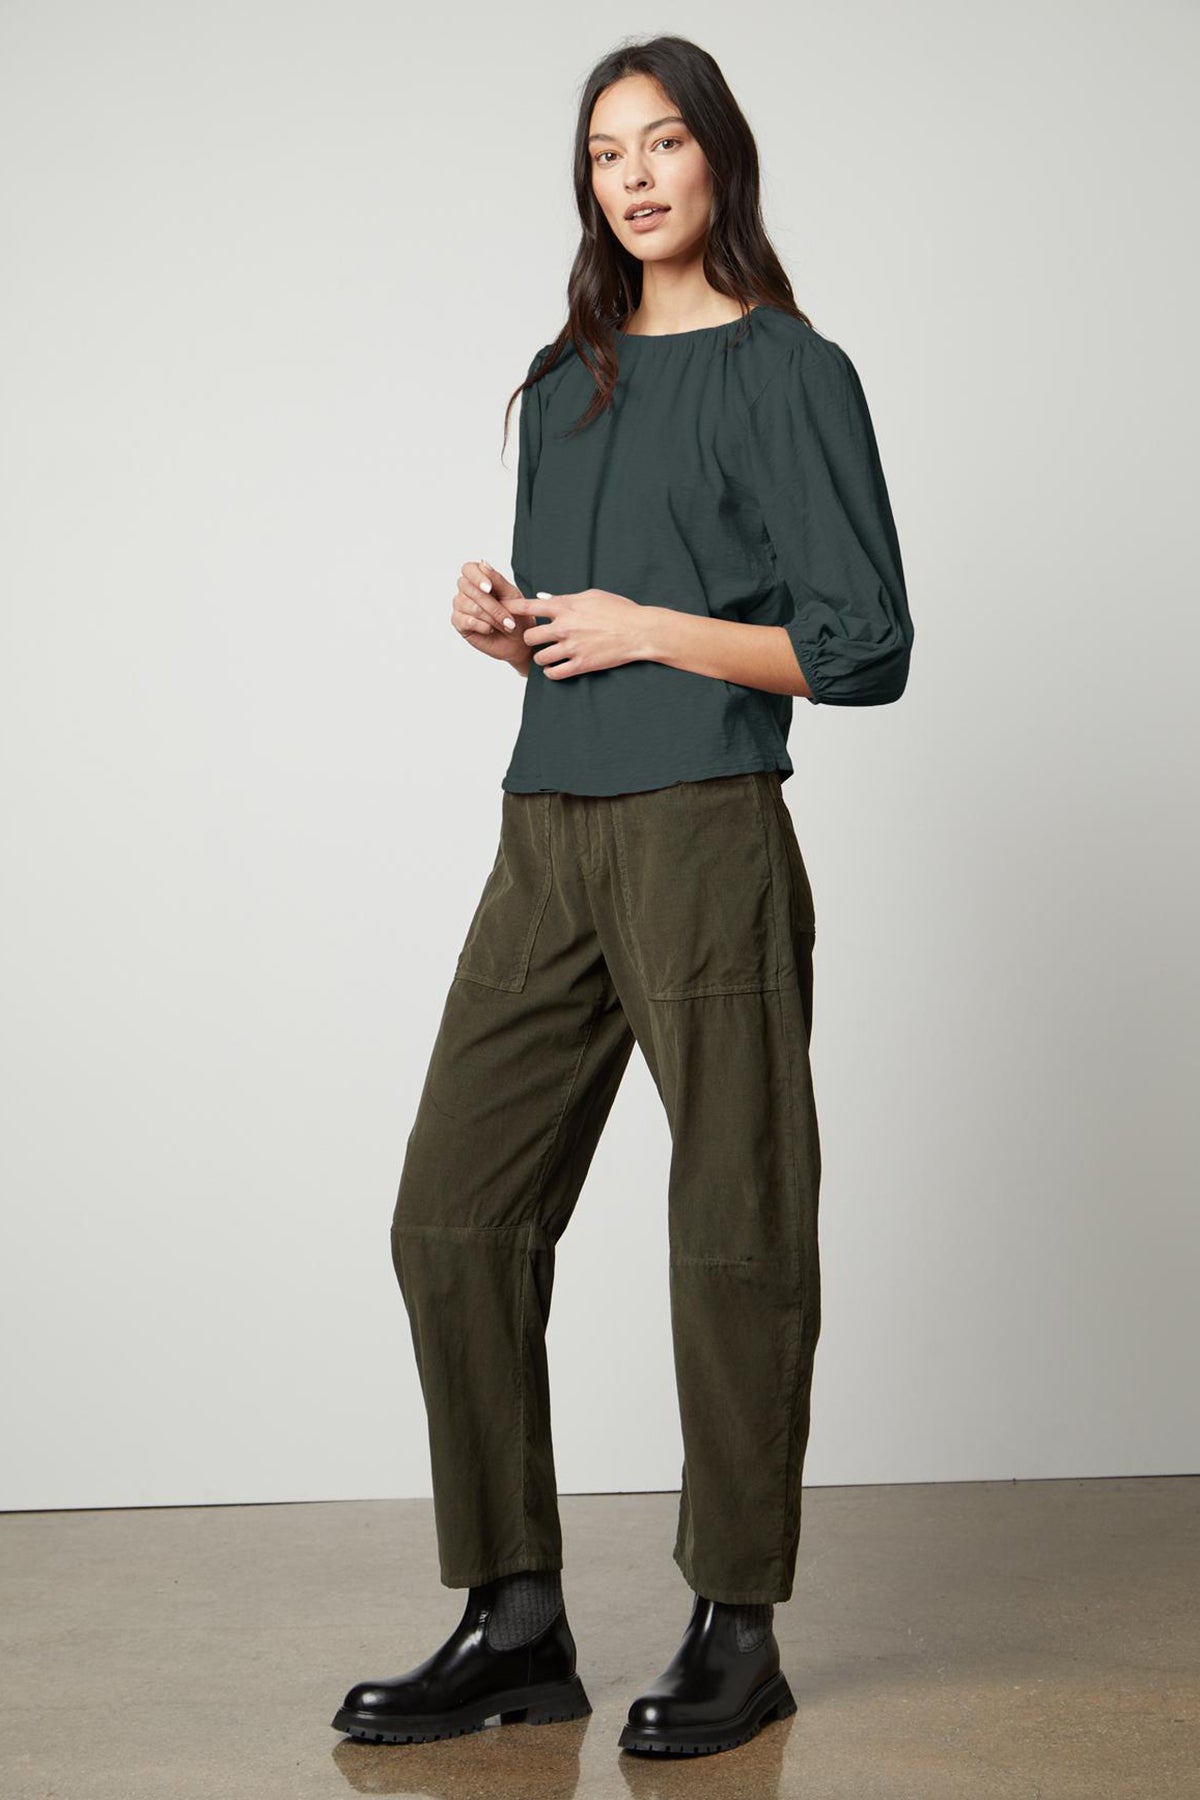   The model is wearing a green SUE CORDUROY PANT with puff sleeves. 